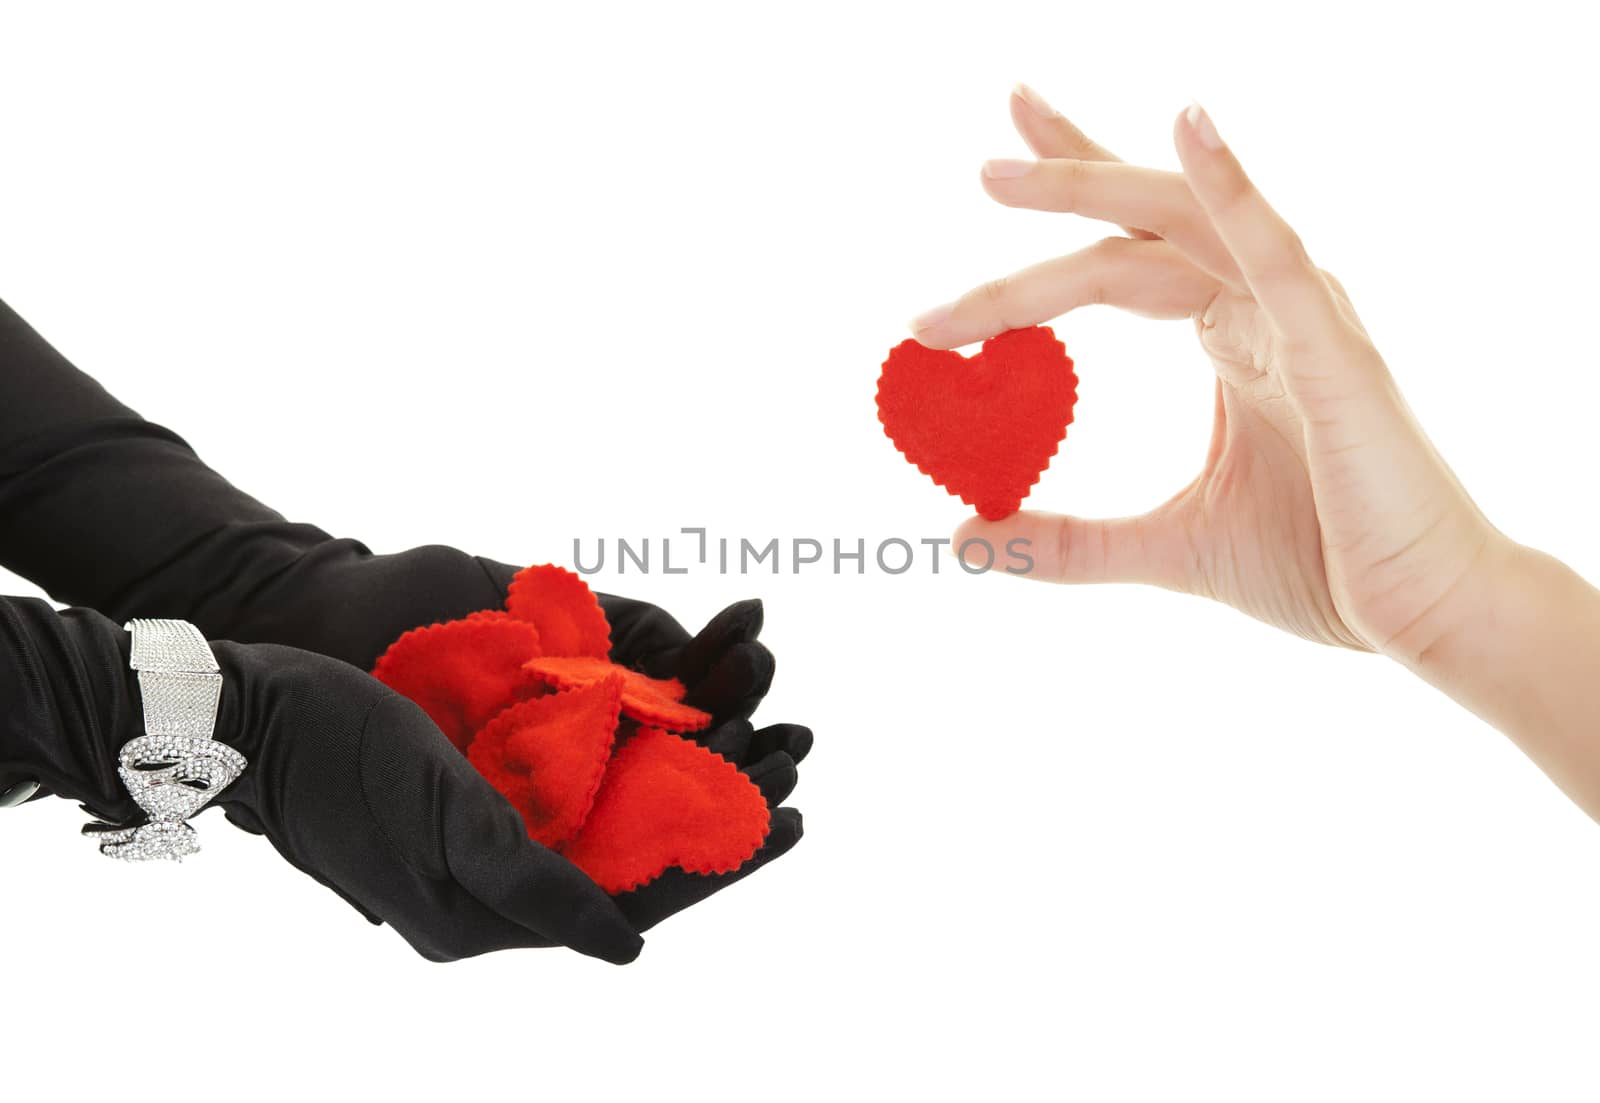 Elegantly gloved hands receive another heart from a female hand.  Shot on white background.